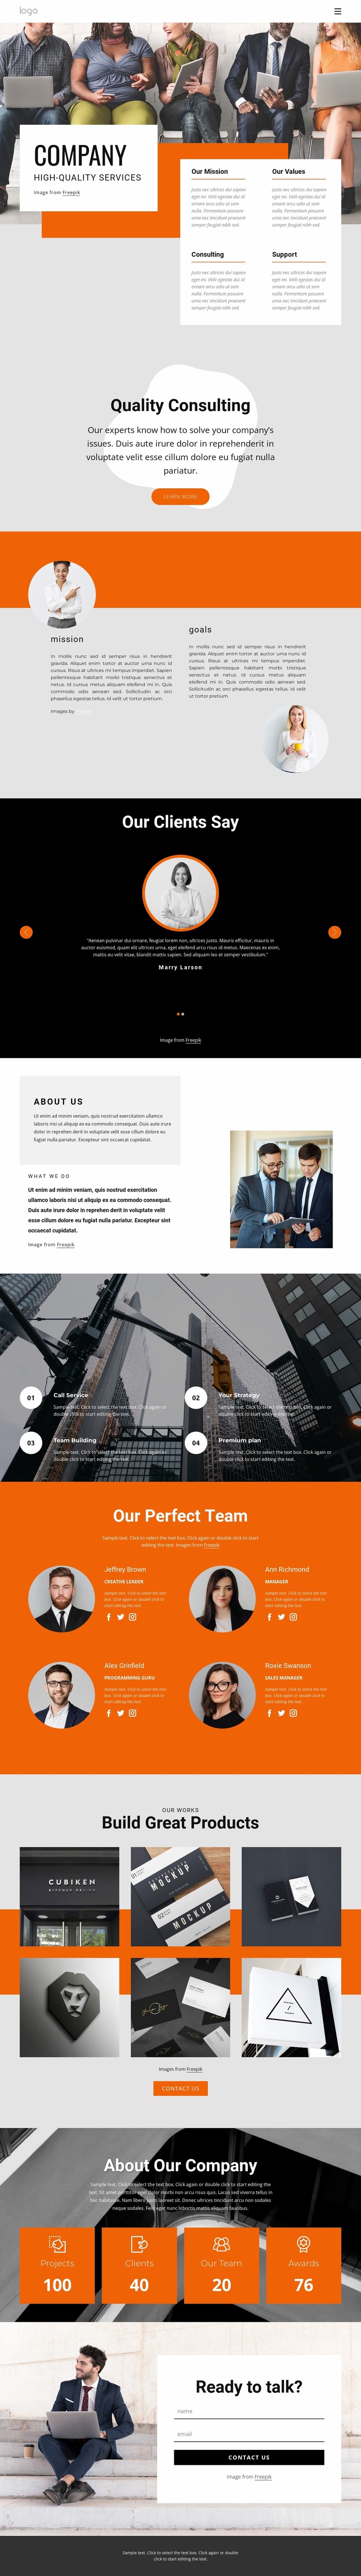 Hight quality consulting firm WordPress Website Builder